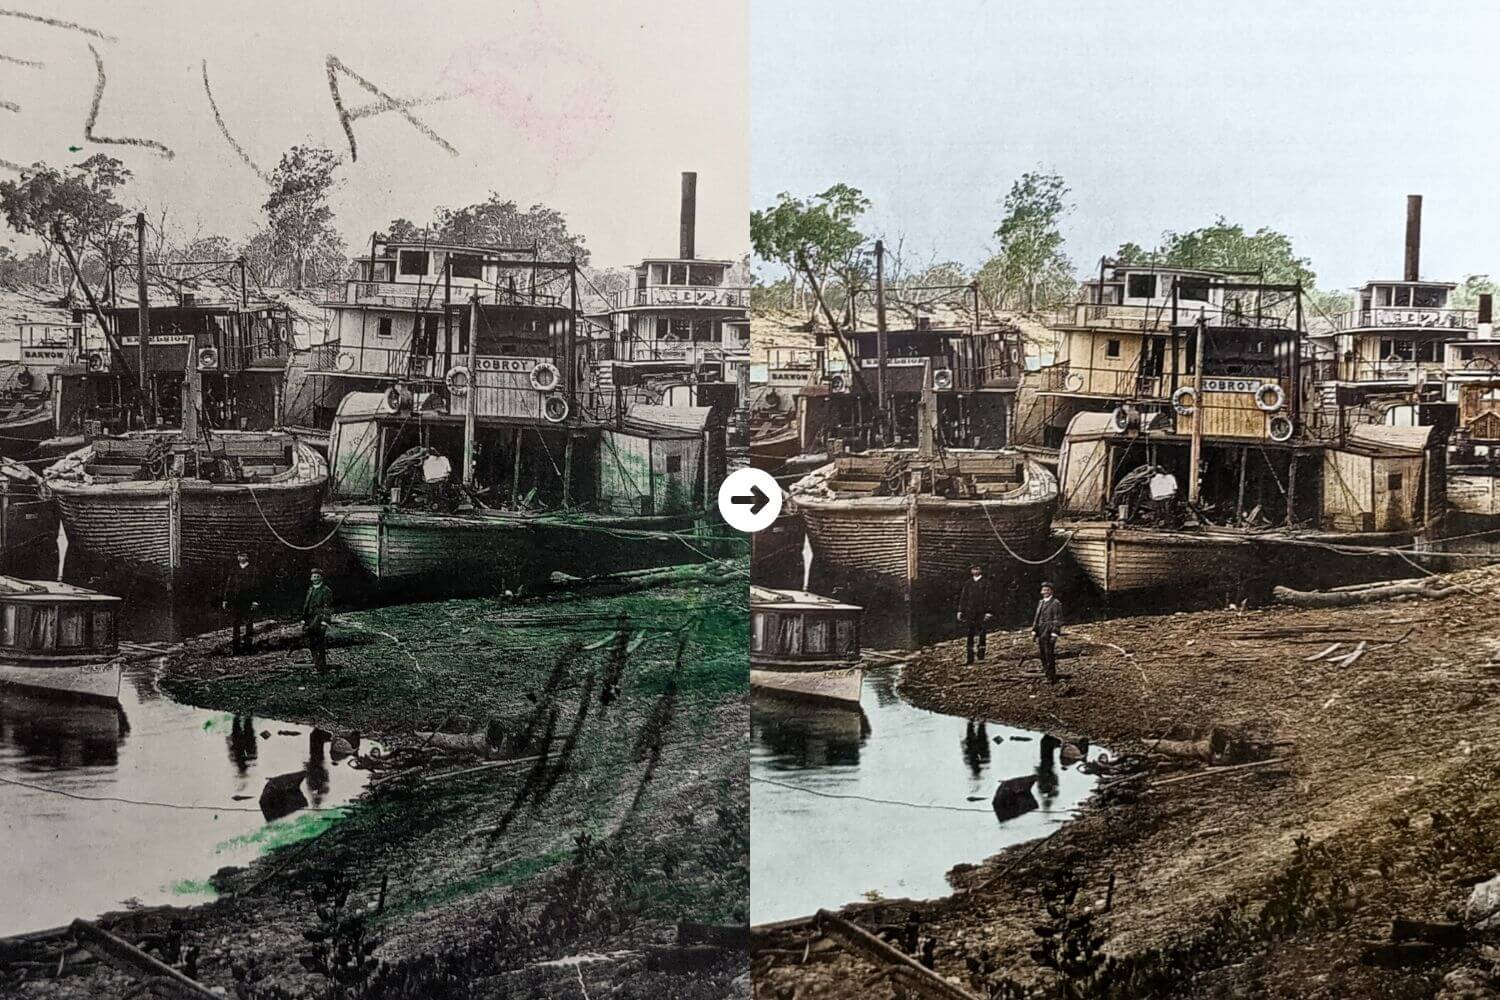 An old photo restoration with removal of crayon marks